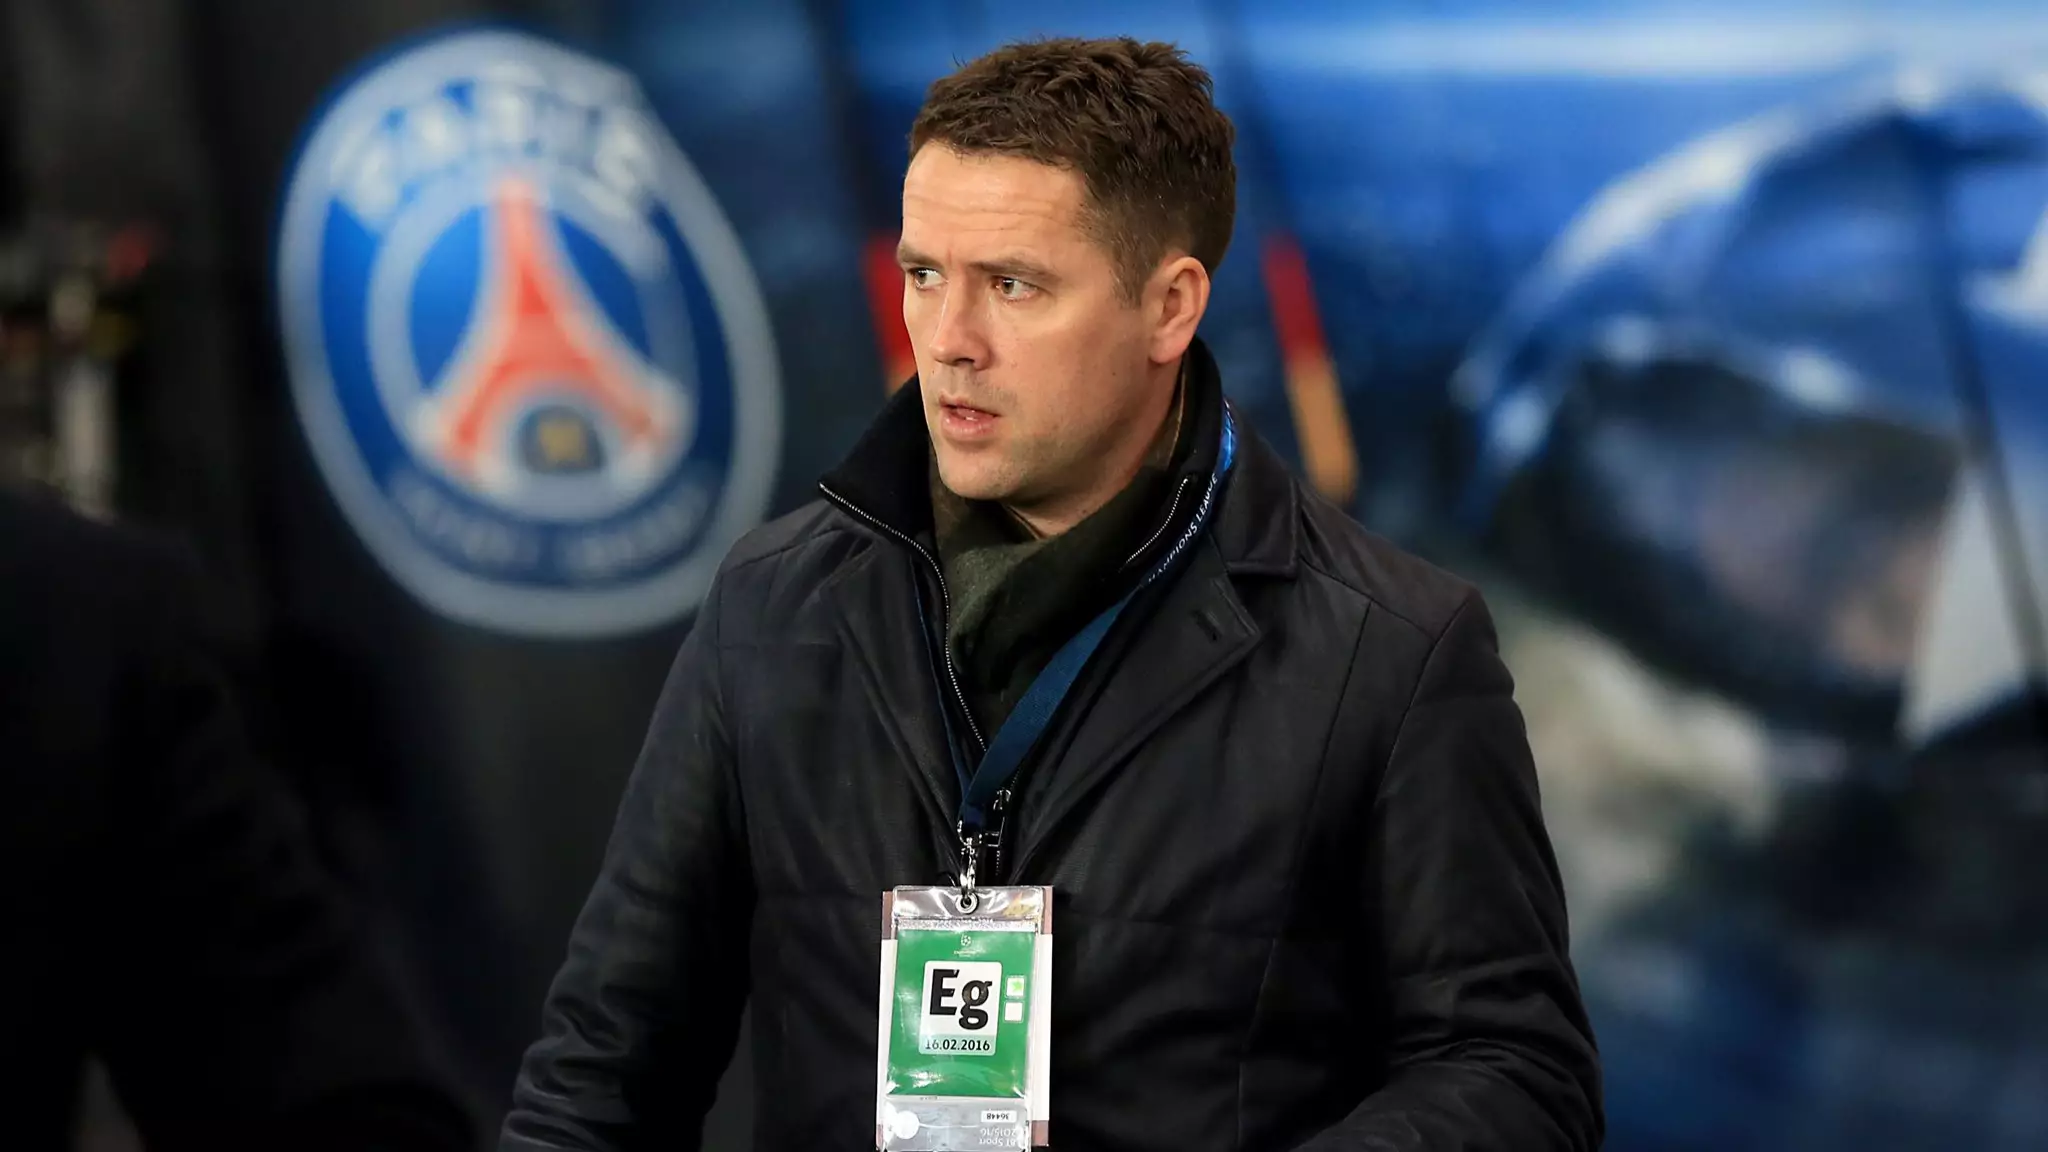 Michael Owen Responds After Further Hate From Liverpool Fans